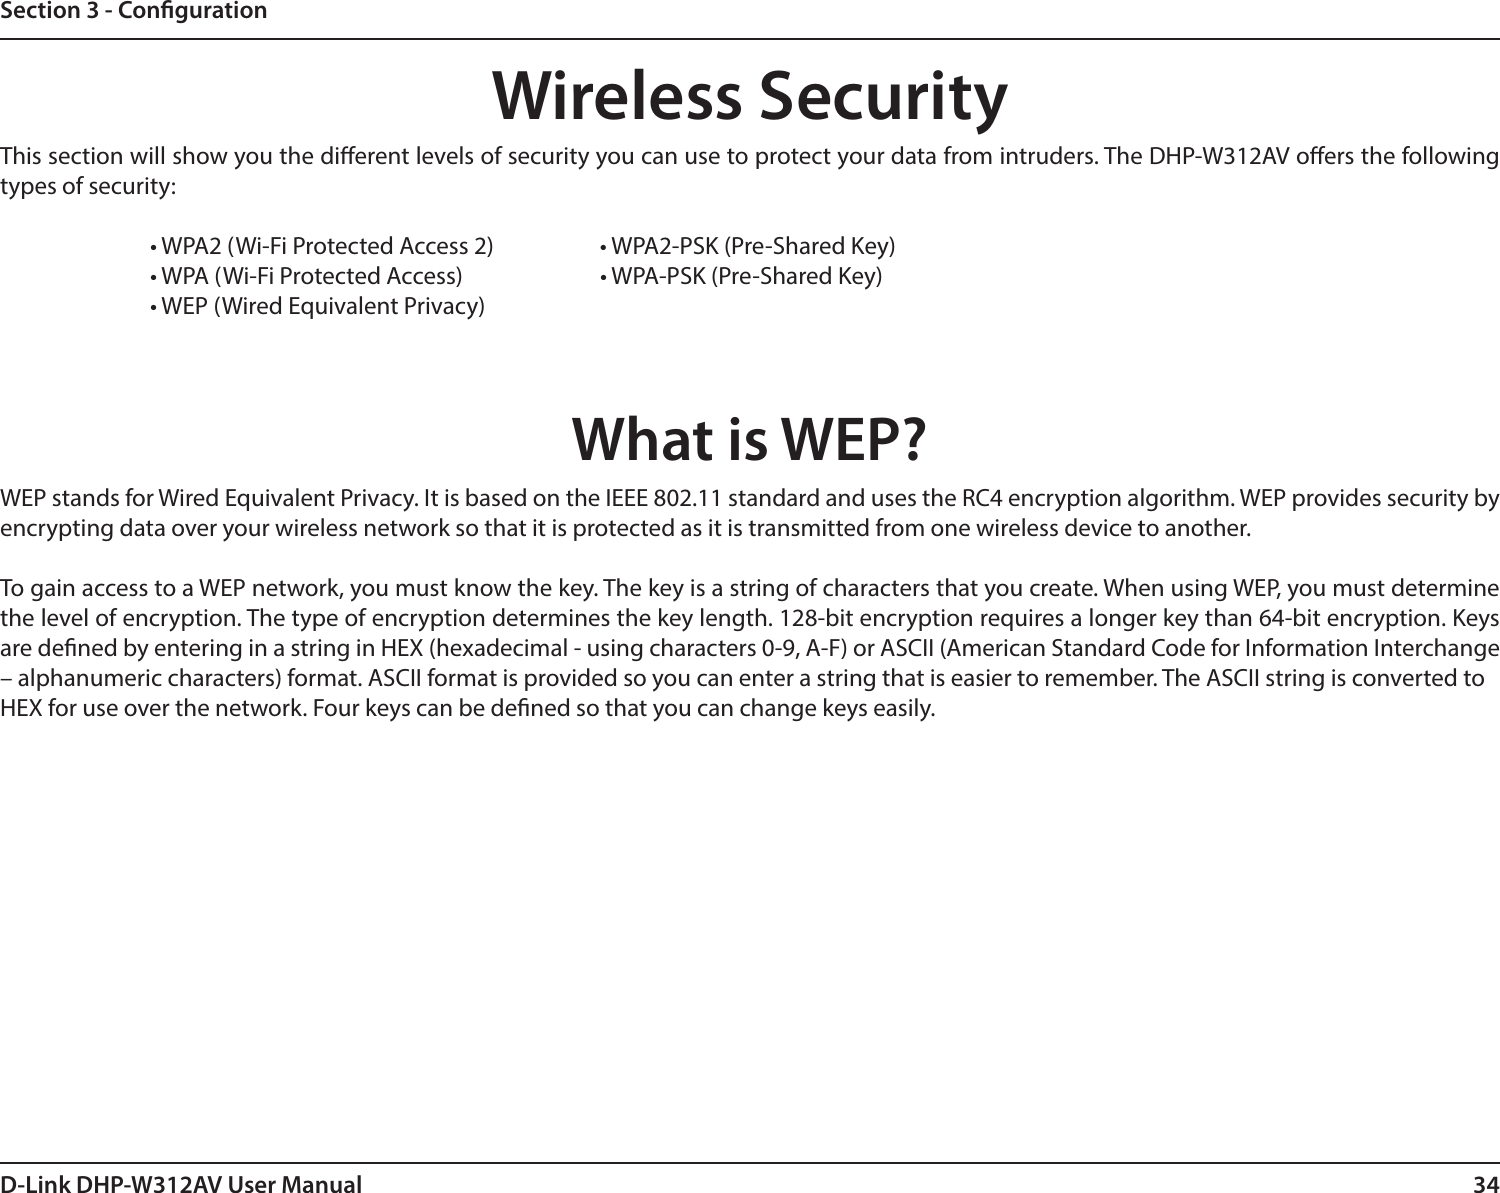 34D-Link DHP-W312AV User ManualSection 3 - CongurationWireless SecurityThis section will show you the dierent levels of security you can use to protect your data from intruders. The DHP-W312AV oers the following types of security:    • WPA2 (Wi-Fi Protected Access 2)     • WPA2-PSK (Pre-Shared Key)    • WPA (Wi-Fi Protected Access)     • WPA-PSK (Pre-Shared Key)    • WEP (Wired Equivalent Privacy)What is WEP?WEP stands for Wired Equivalent Privacy. It is based on the IEEE 802.11 standard and uses the RC4 encryption algorithm. WEP provides security by encrypting data over your wireless network so that it is protected as it is transmitted from one wireless device to another.To gain access to a WEP network, you must know the key. The key is a string of characters that you create. When using WEP, you must determine the level of encryption. The type of encryption determines the key length. 128-bit encryption requires a longer key than 64-bit encryption. Keys are dened by entering in a string in HEX (hexadecimal - using characters 0-9, A-F) or ASCII (American Standard Code for Information Interchange – alphanumeric characters) format. ASCII format is provided so you can enter a string that is easier to remember. The ASCII string is converted toHEX for use over the network. Four keys can be dened so that you can change keys easily.